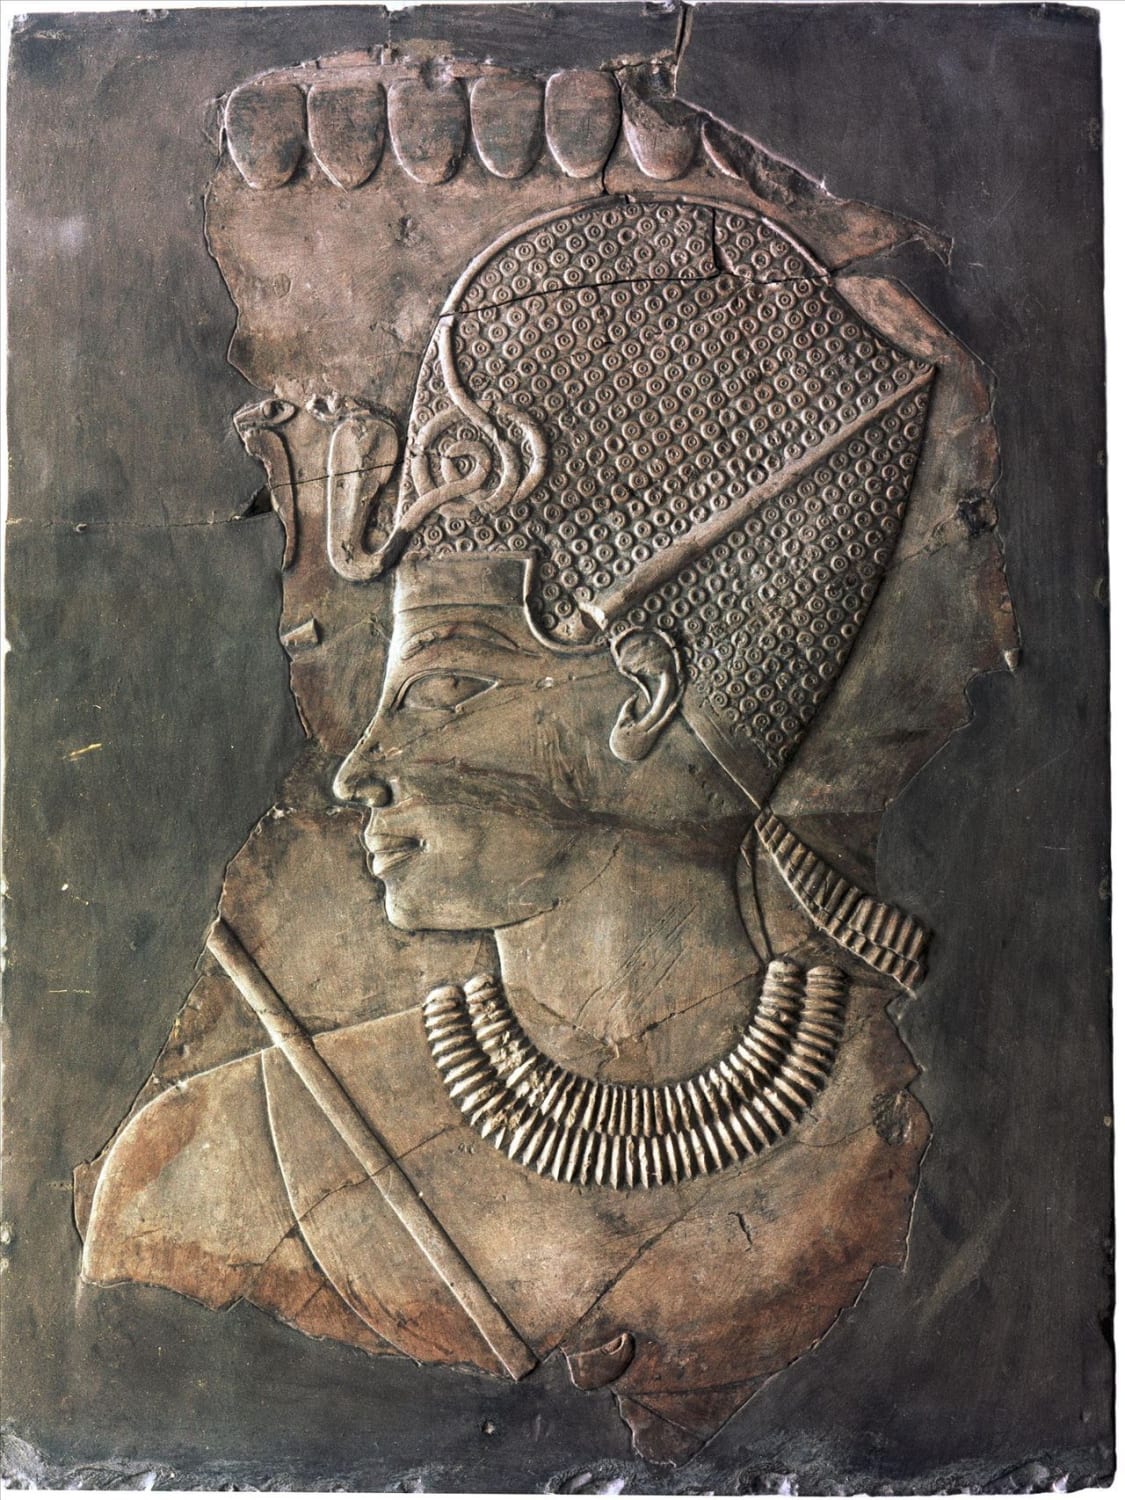 Relief image of the Pharaoh Amenhotep III wearing the Blue Crown, from the Tomb of Khaemhat (TT57). New Kingdom, 18th Dynasty, ca. 1550-1292 BC. Now in the Neues Museum, Berlin.